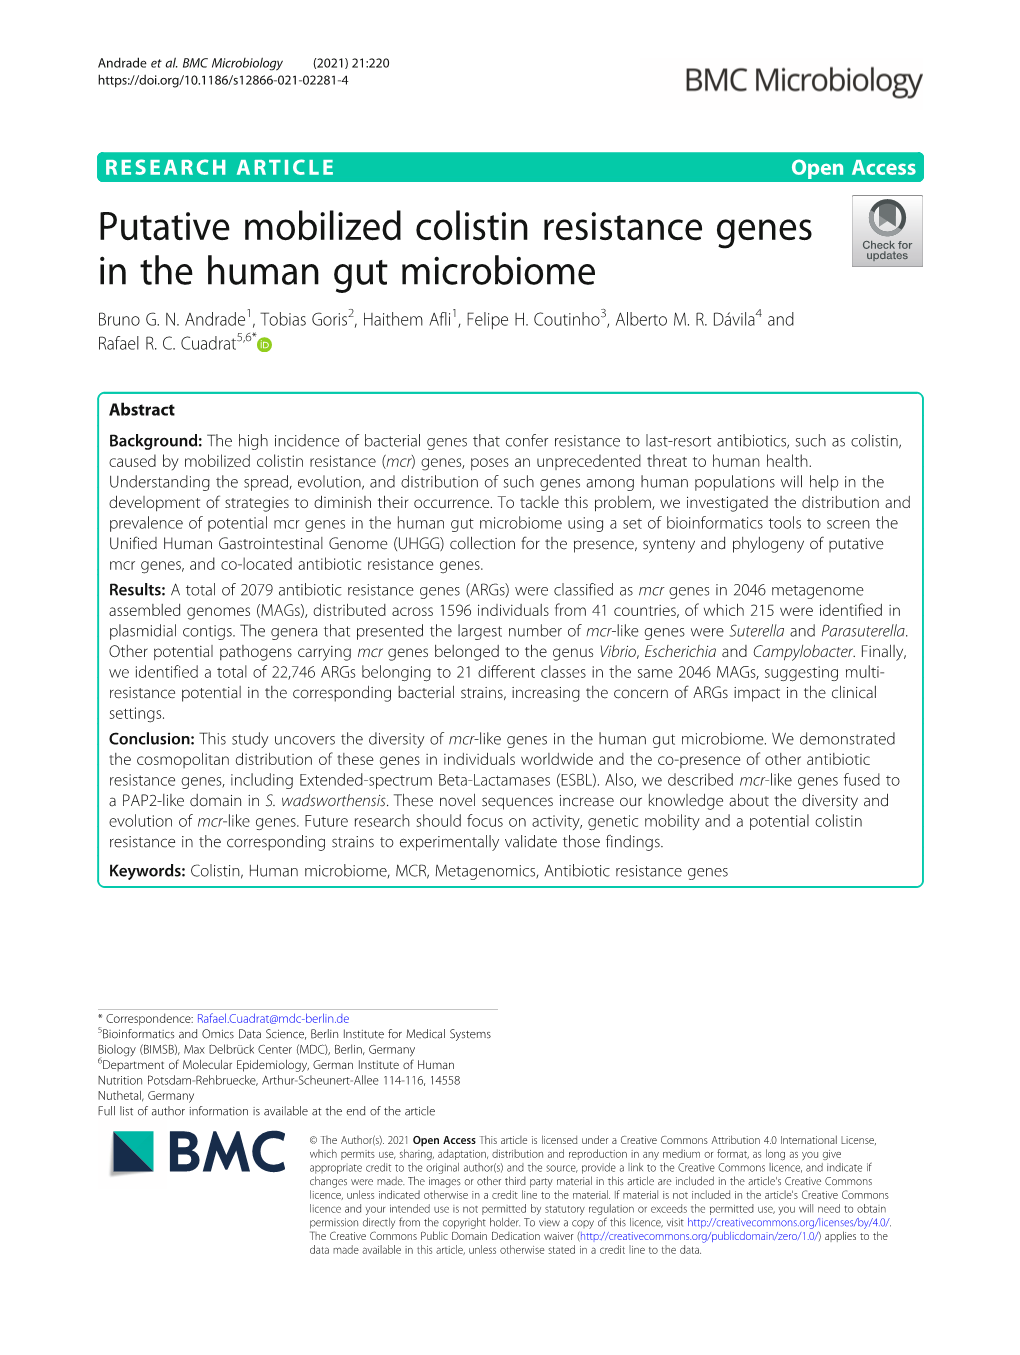 Putative Mobilized Colistin Resistance Genes in the Human Gut Microbiome Bruno G